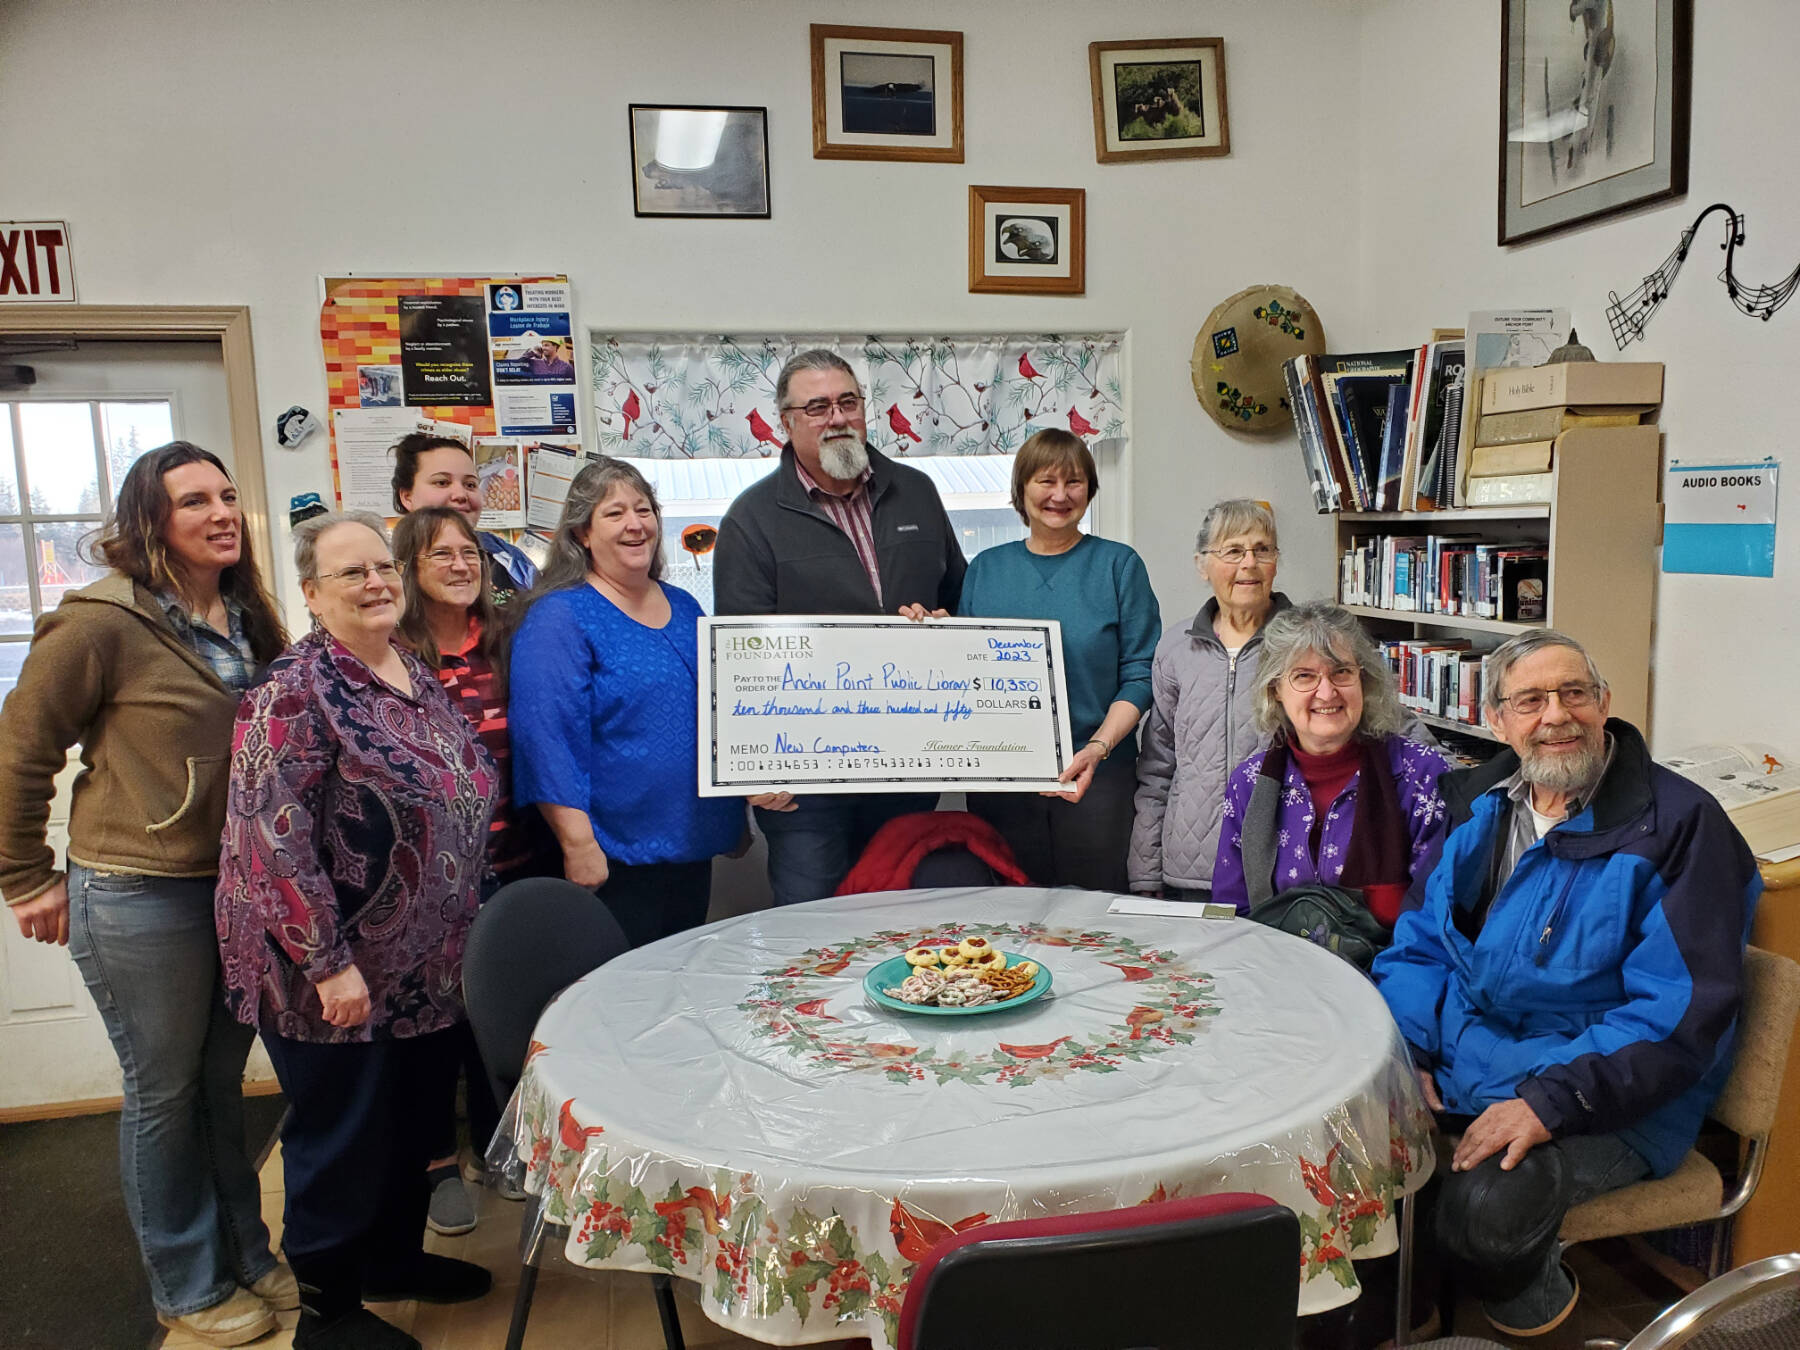 Homer Foundation executive director Mike Miller (center) presents a grant check to Anchor Point Public Library staff and board members (from left) Rachel Bice, Tressa Hidden Friend, Bobby Ness, Genevieve Winrod, Deanna Thomas, Mary Perry, Ann Bailey, Sandy Lettis and Don Bailey on Monday, Nov. 27, 2023 in Anchor Point, Alaska. (Delcenia Cosman/Homer News)